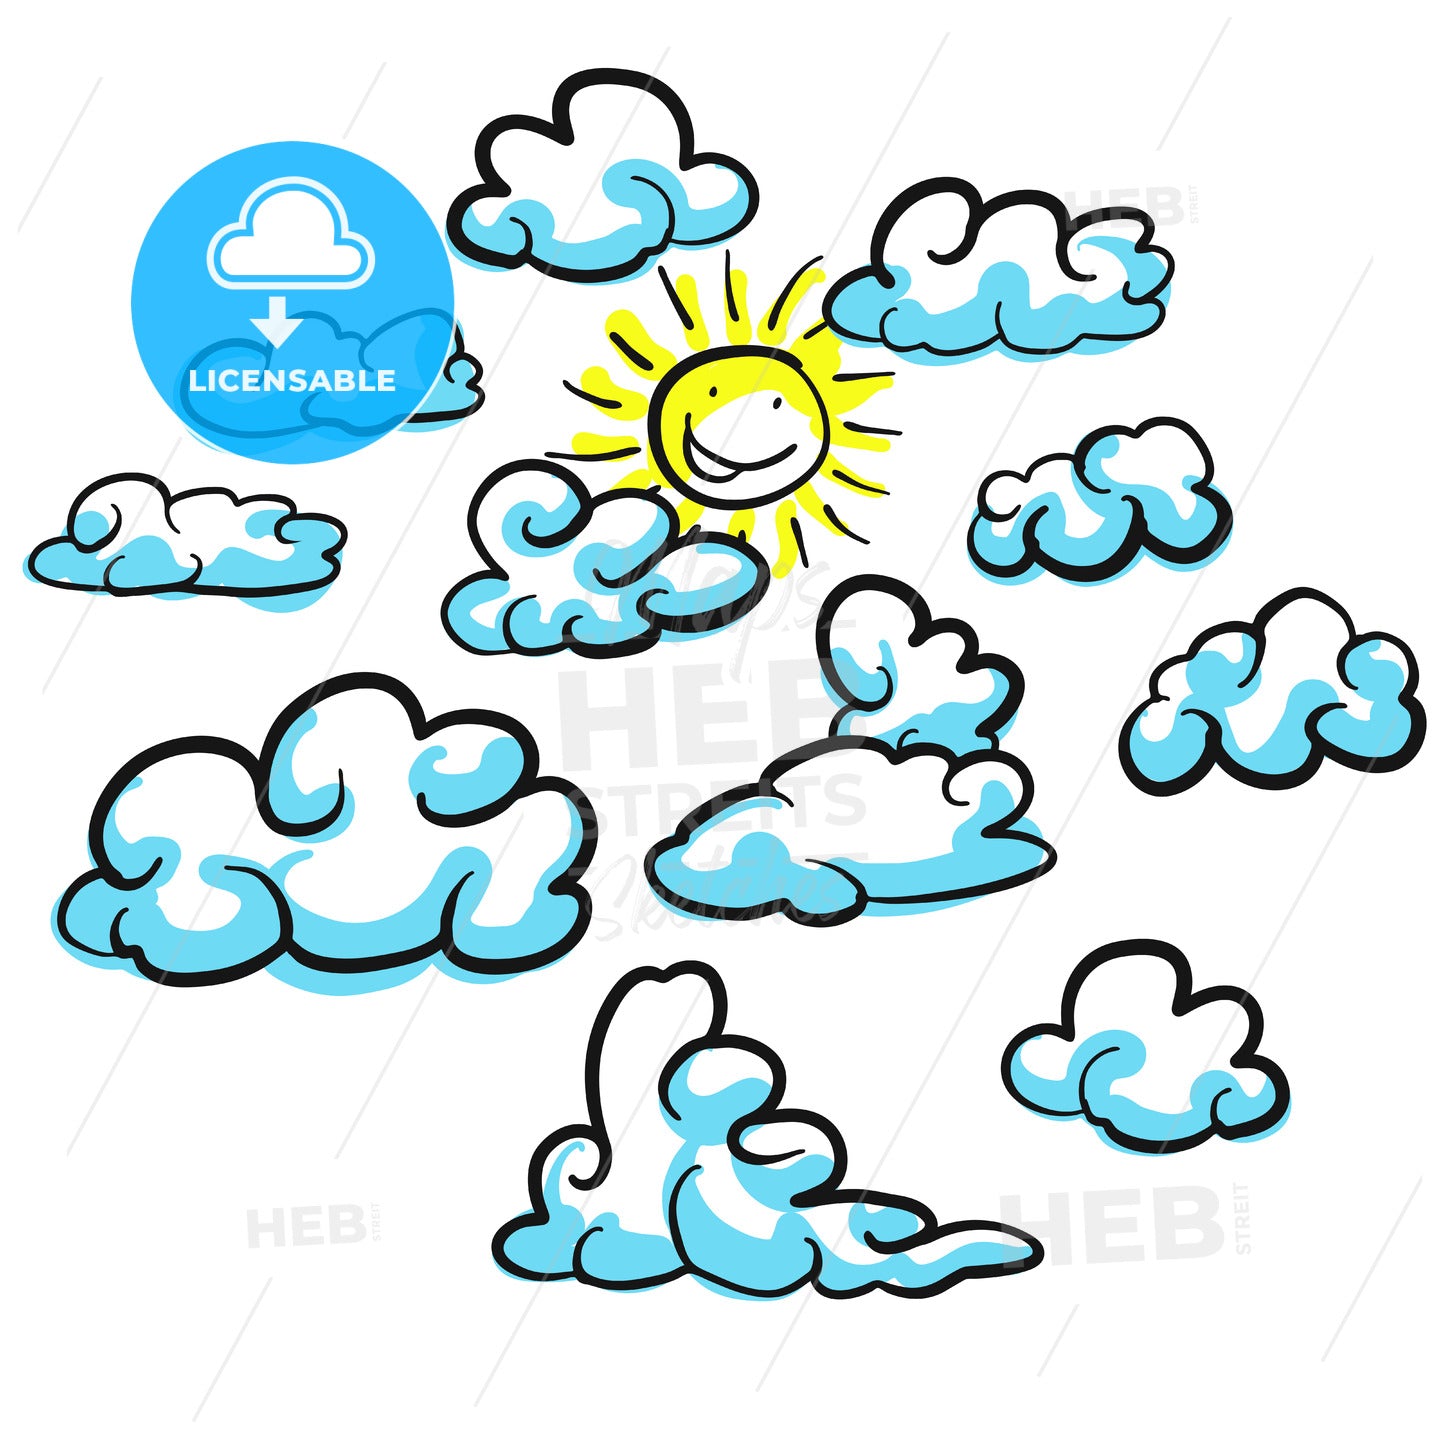 Various cloud shapes vector sketches with sun – instant download